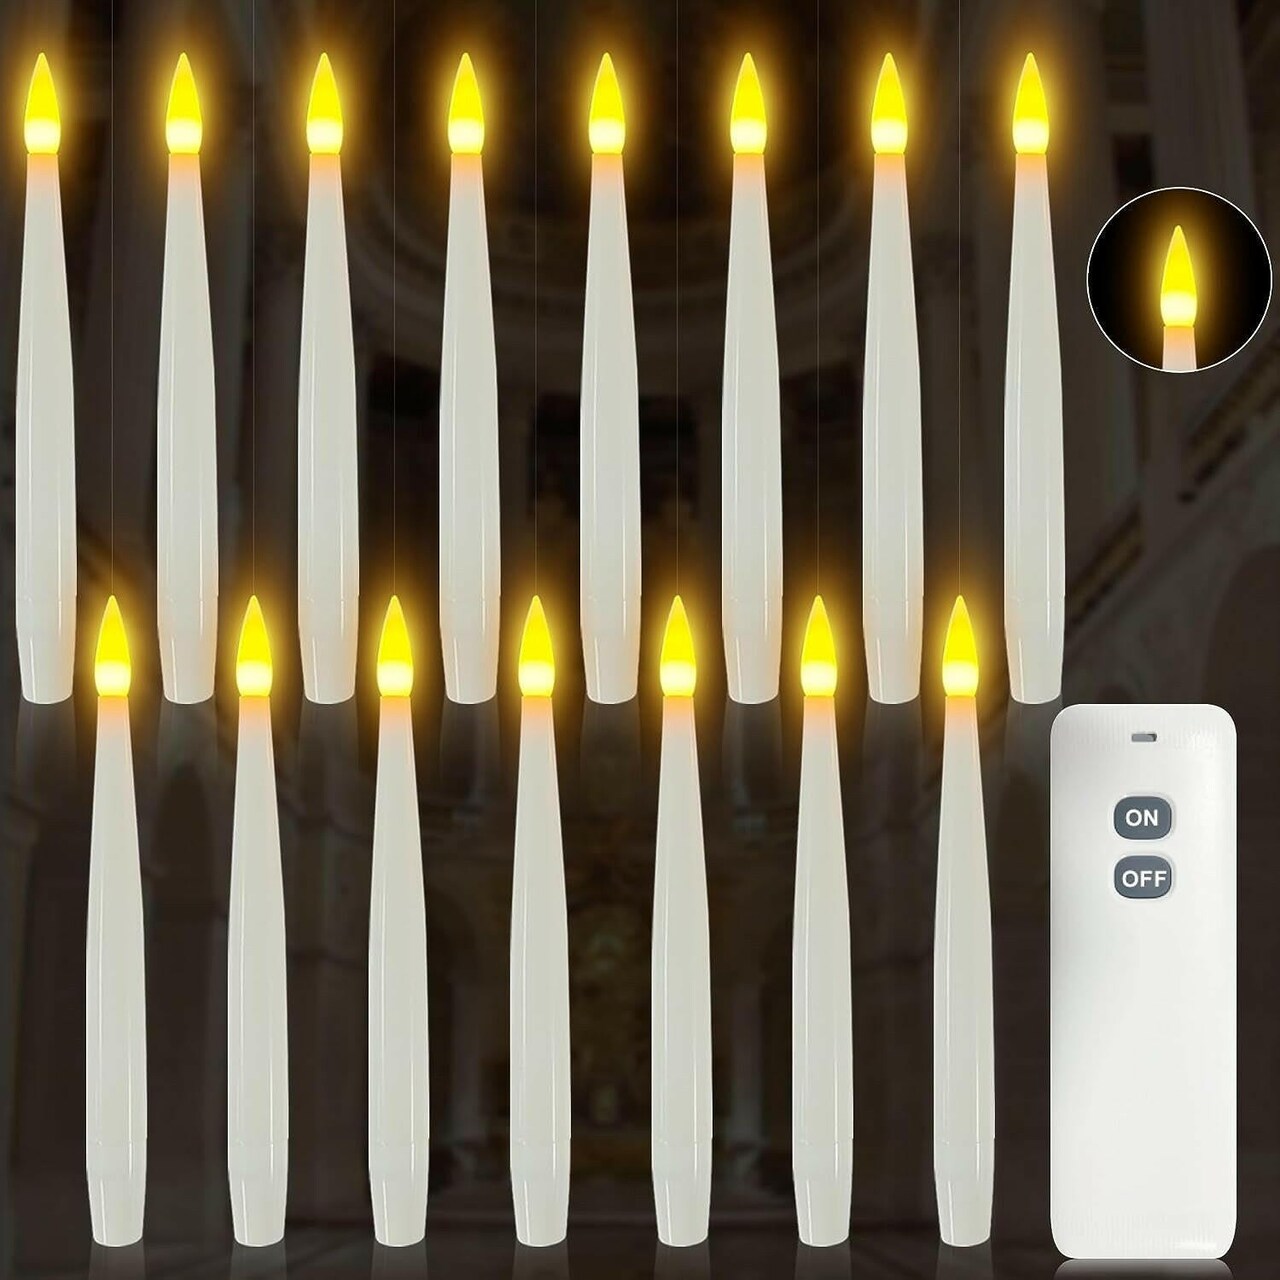 Floating Candles with Wand, 20 Pcs Magic Hanging Candles, Flickering Warm  Light Flameless Floating LED Candle with Wand Remote, Battery Operated